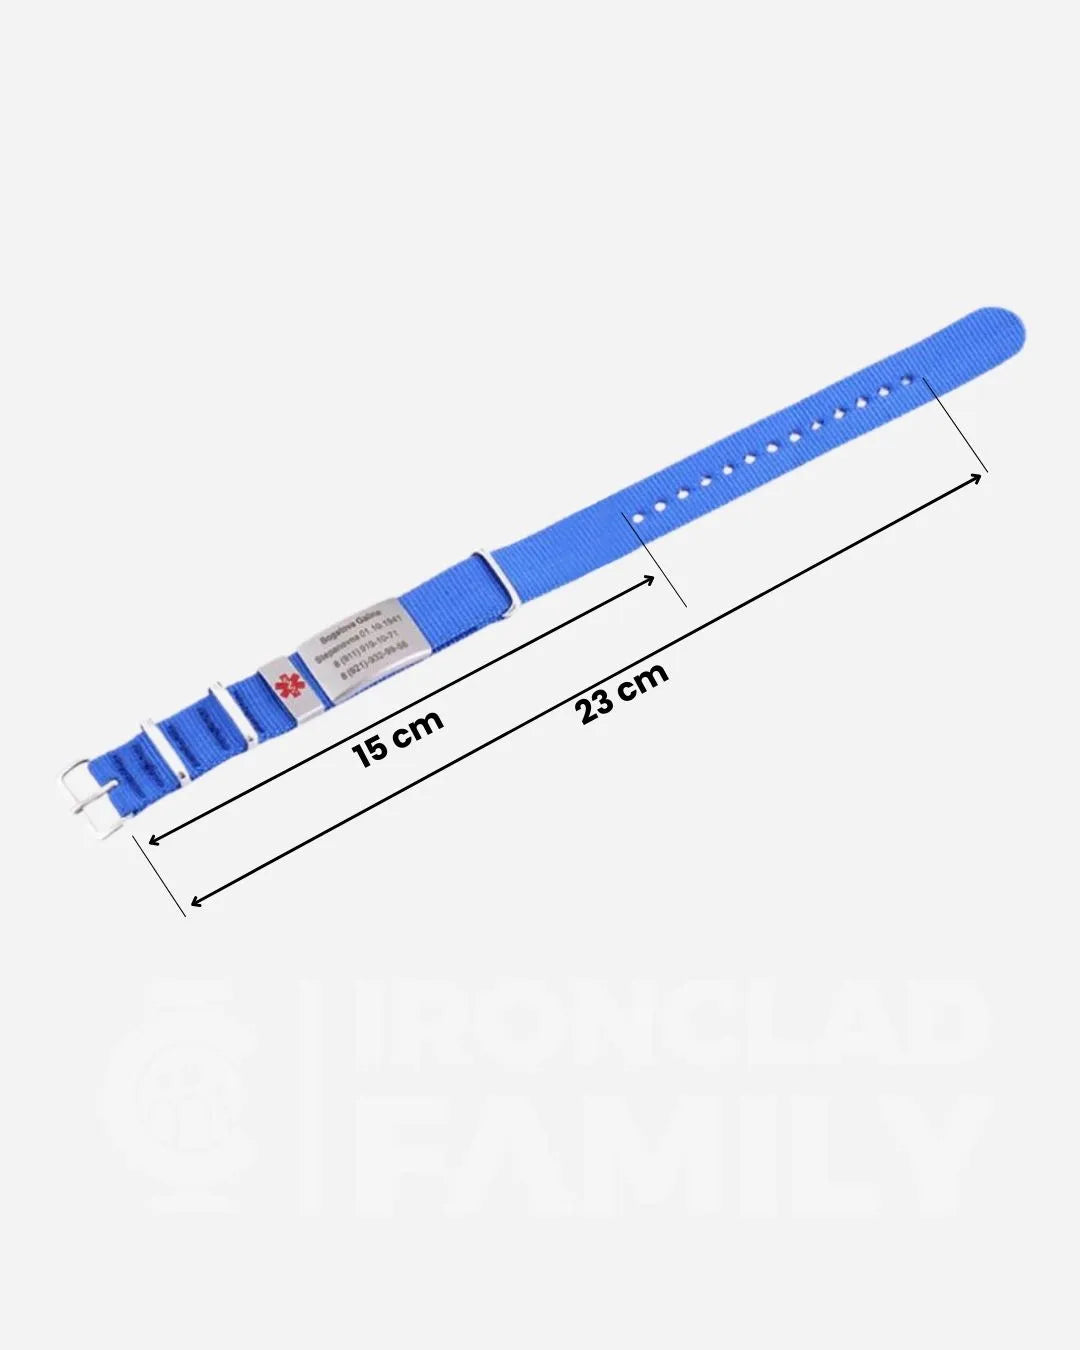 Blue fabric medical ID bracelet with sizing measurements indicated